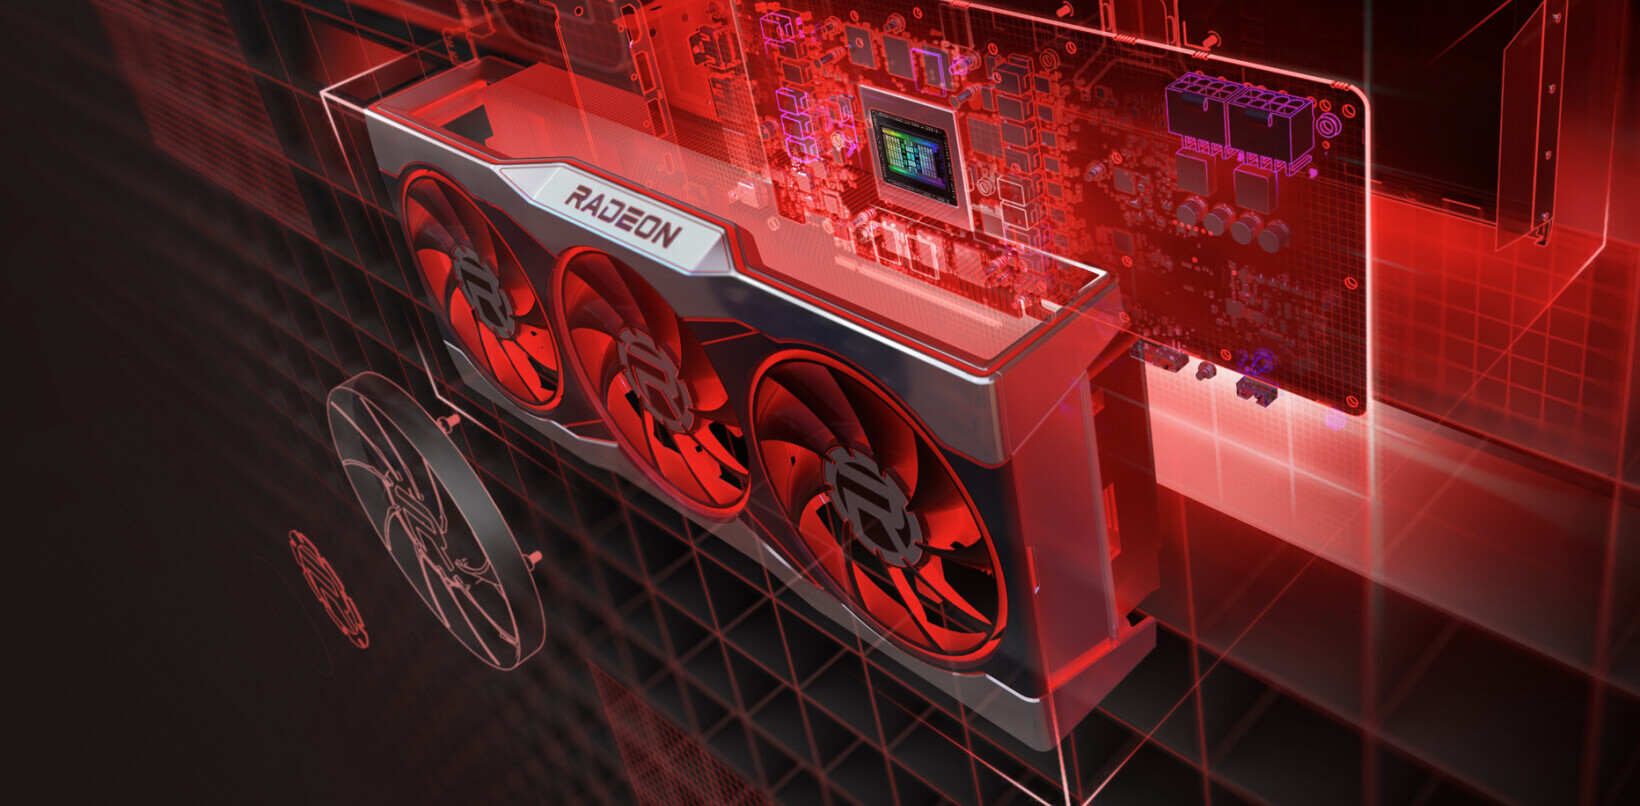 How AMD made its big GPU launches happen during the pandemic